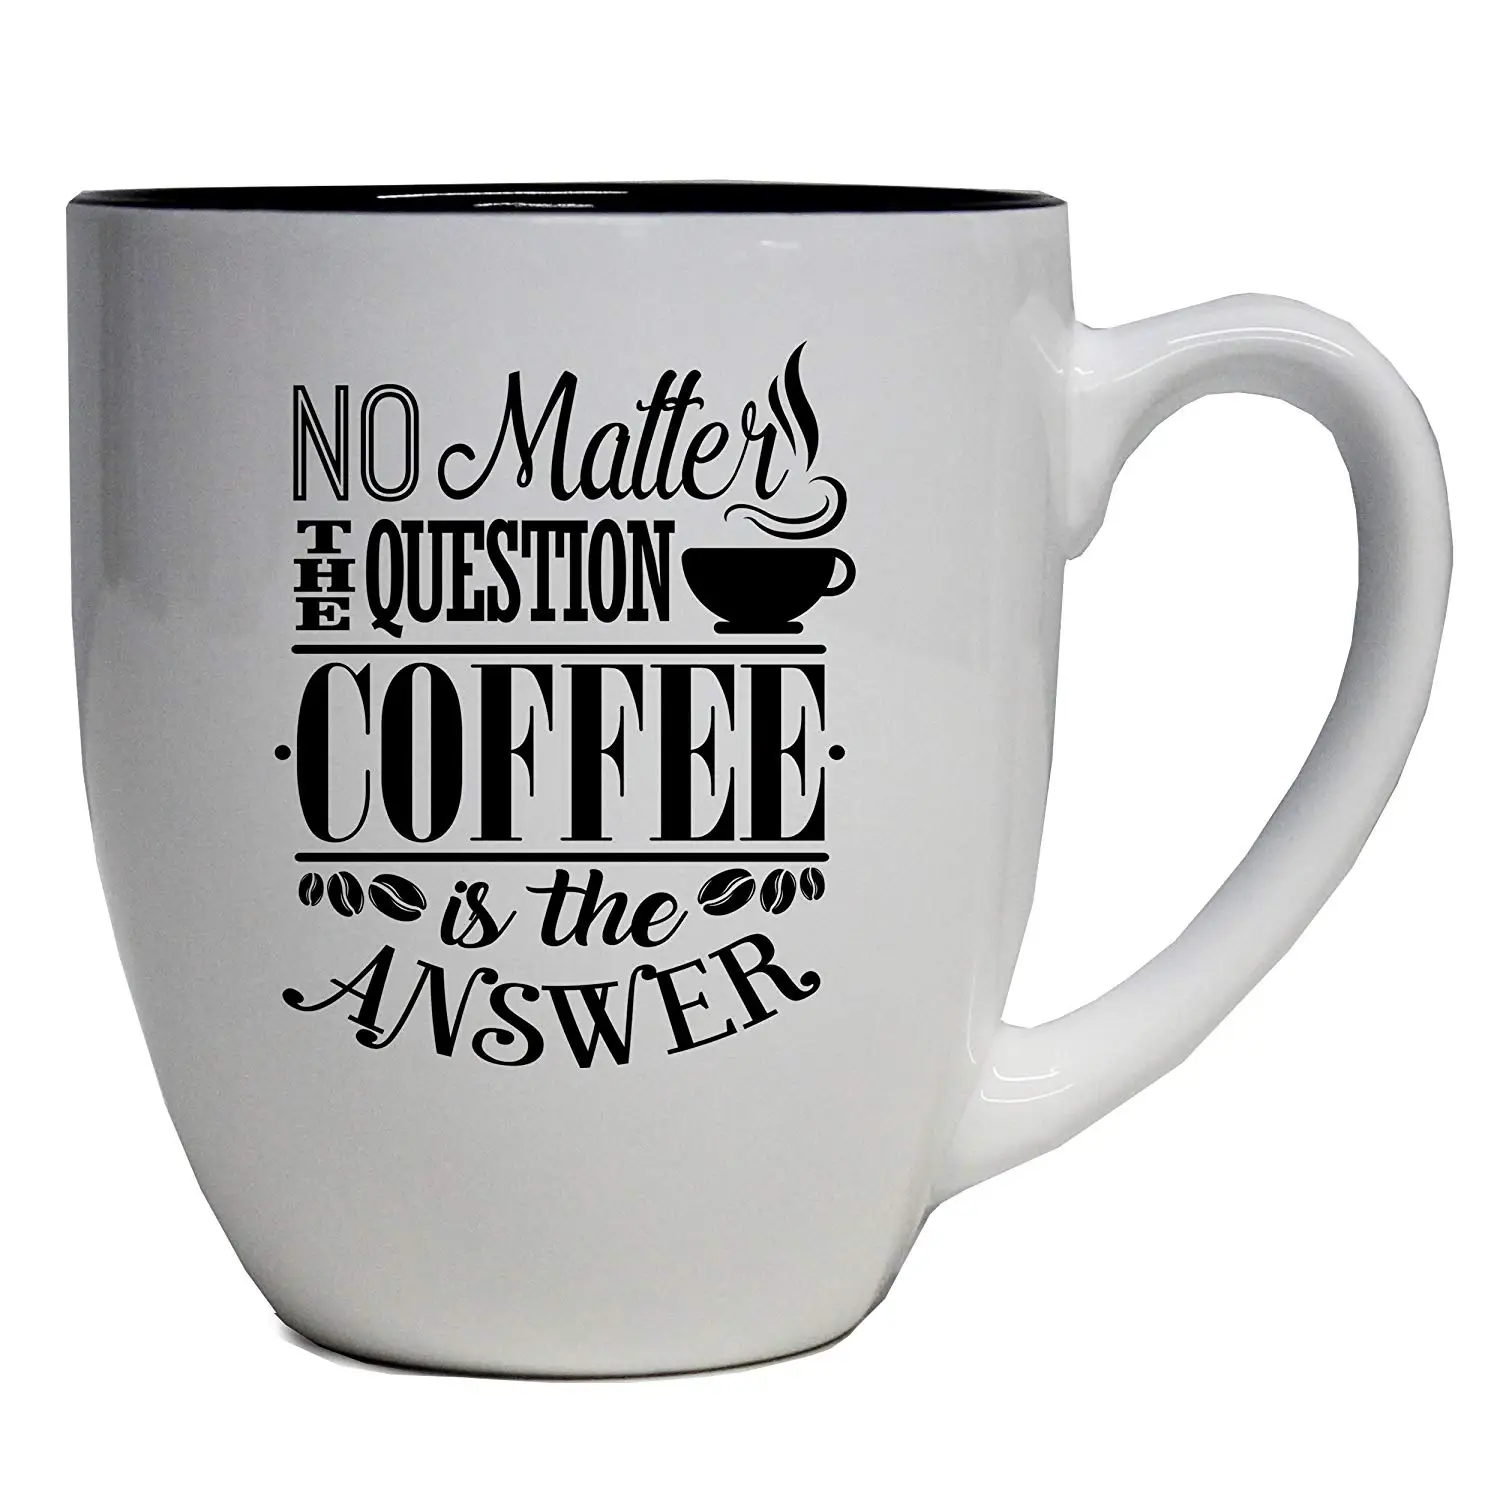 Funny Coffee Mugs With Sayings for Men and Women - Fun Inspirational Latte ...